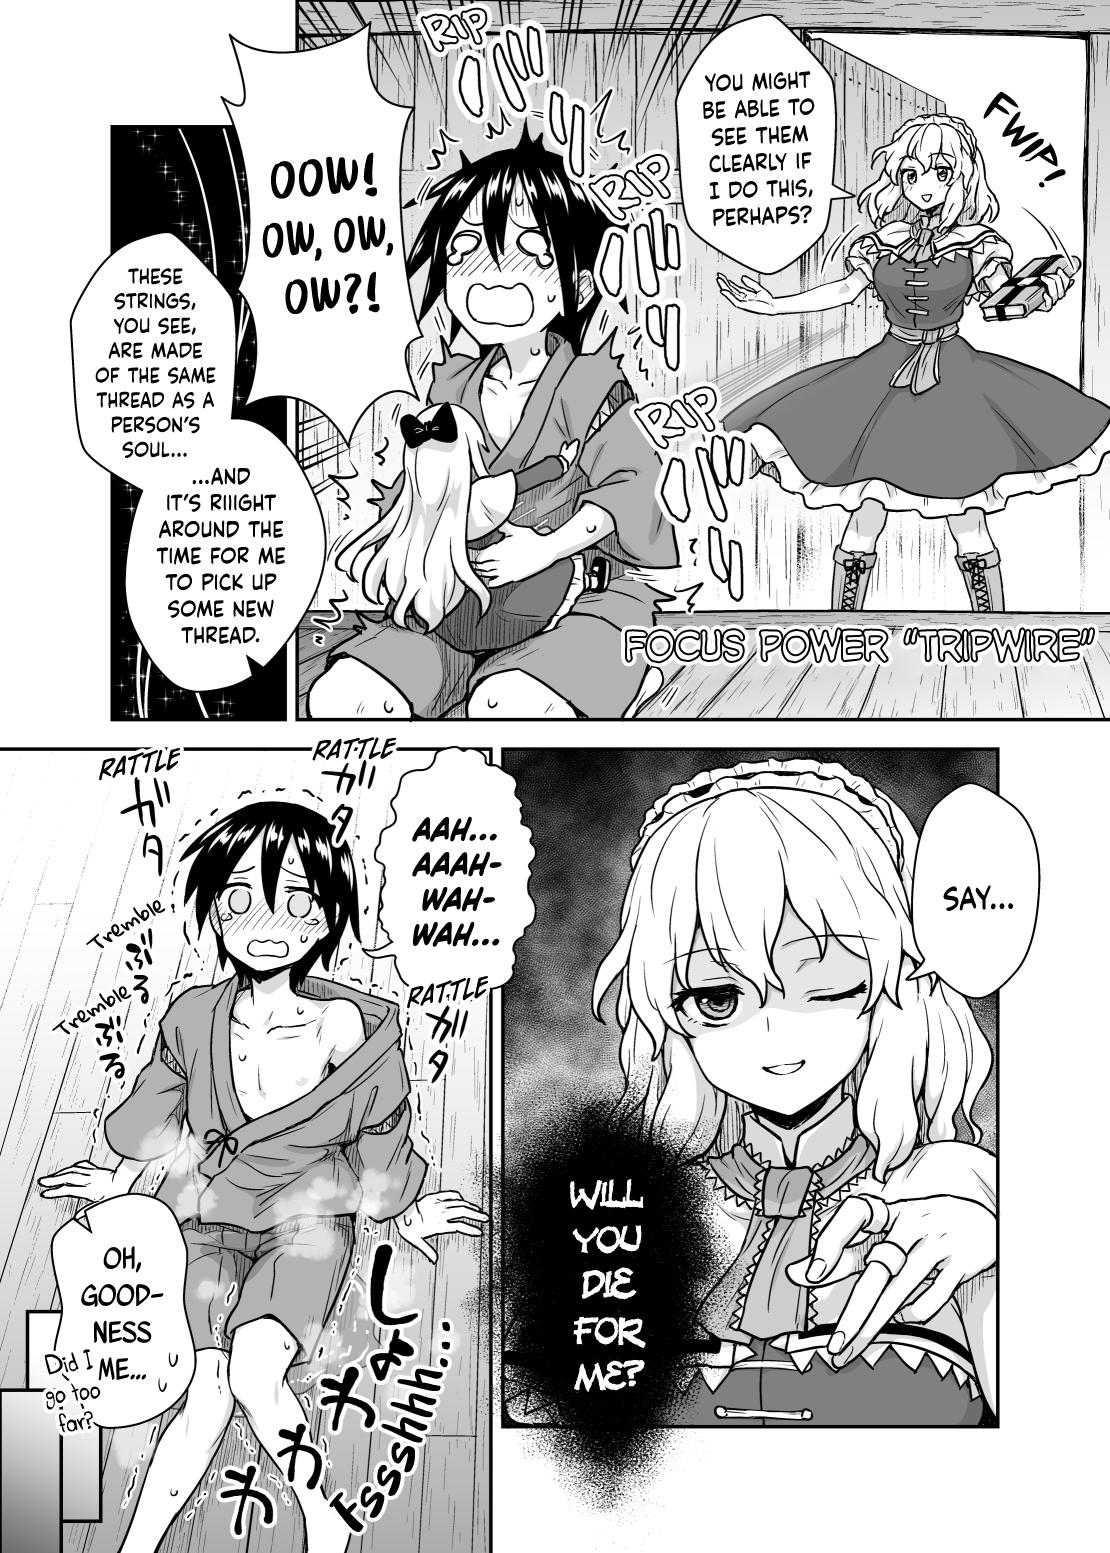 Cbt Alice-san to Himitsuzukuri | Making Secrets with Miss Alice - Touhou project Gay Hardcore - Page 4